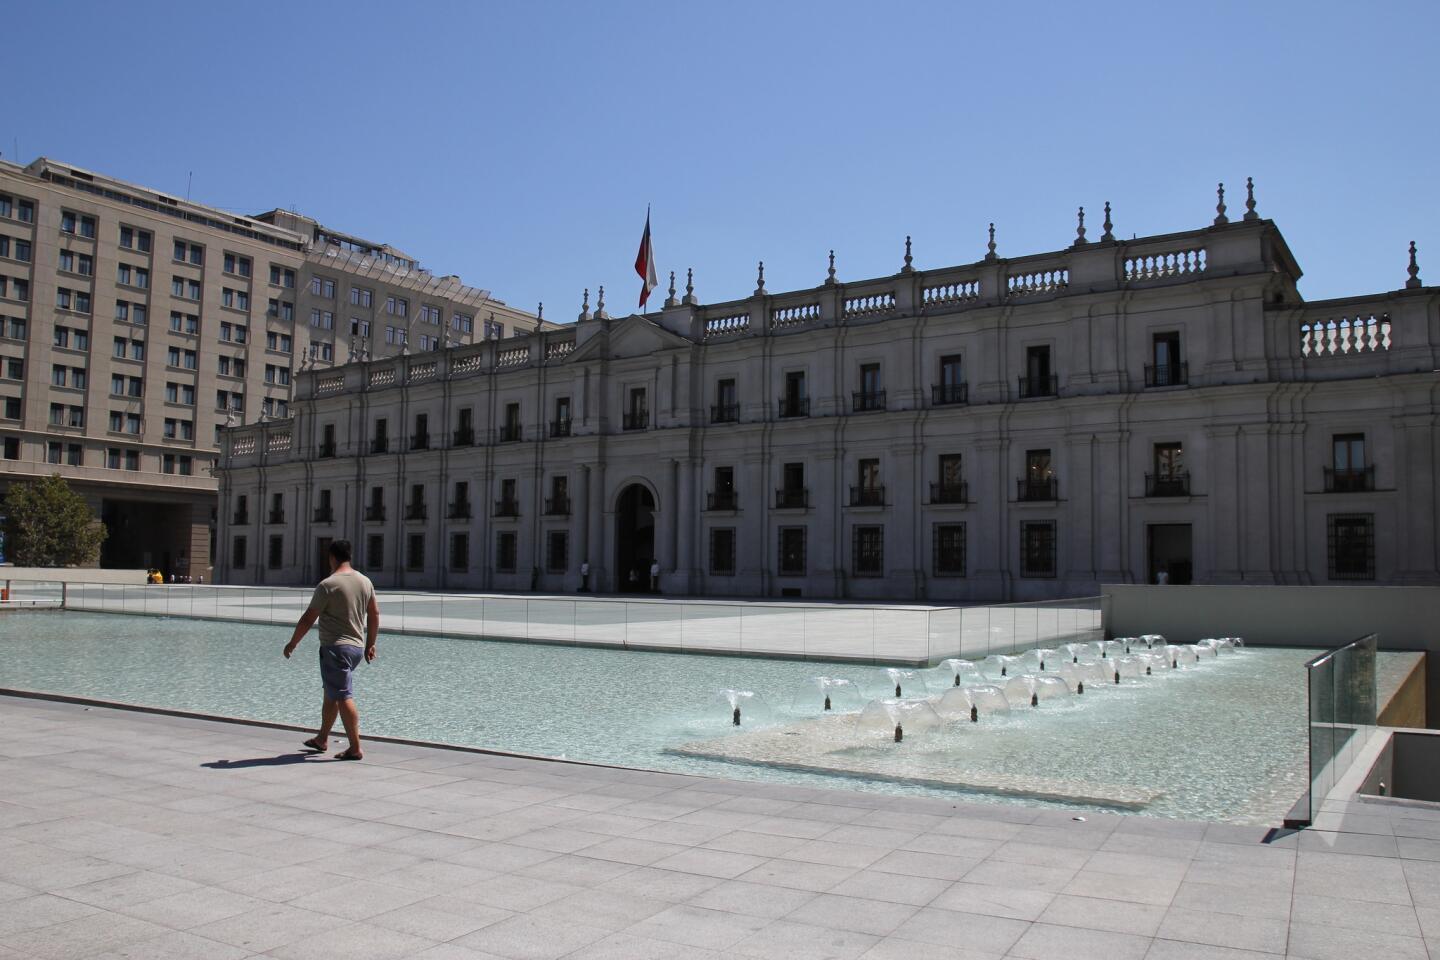 A view of the plaza